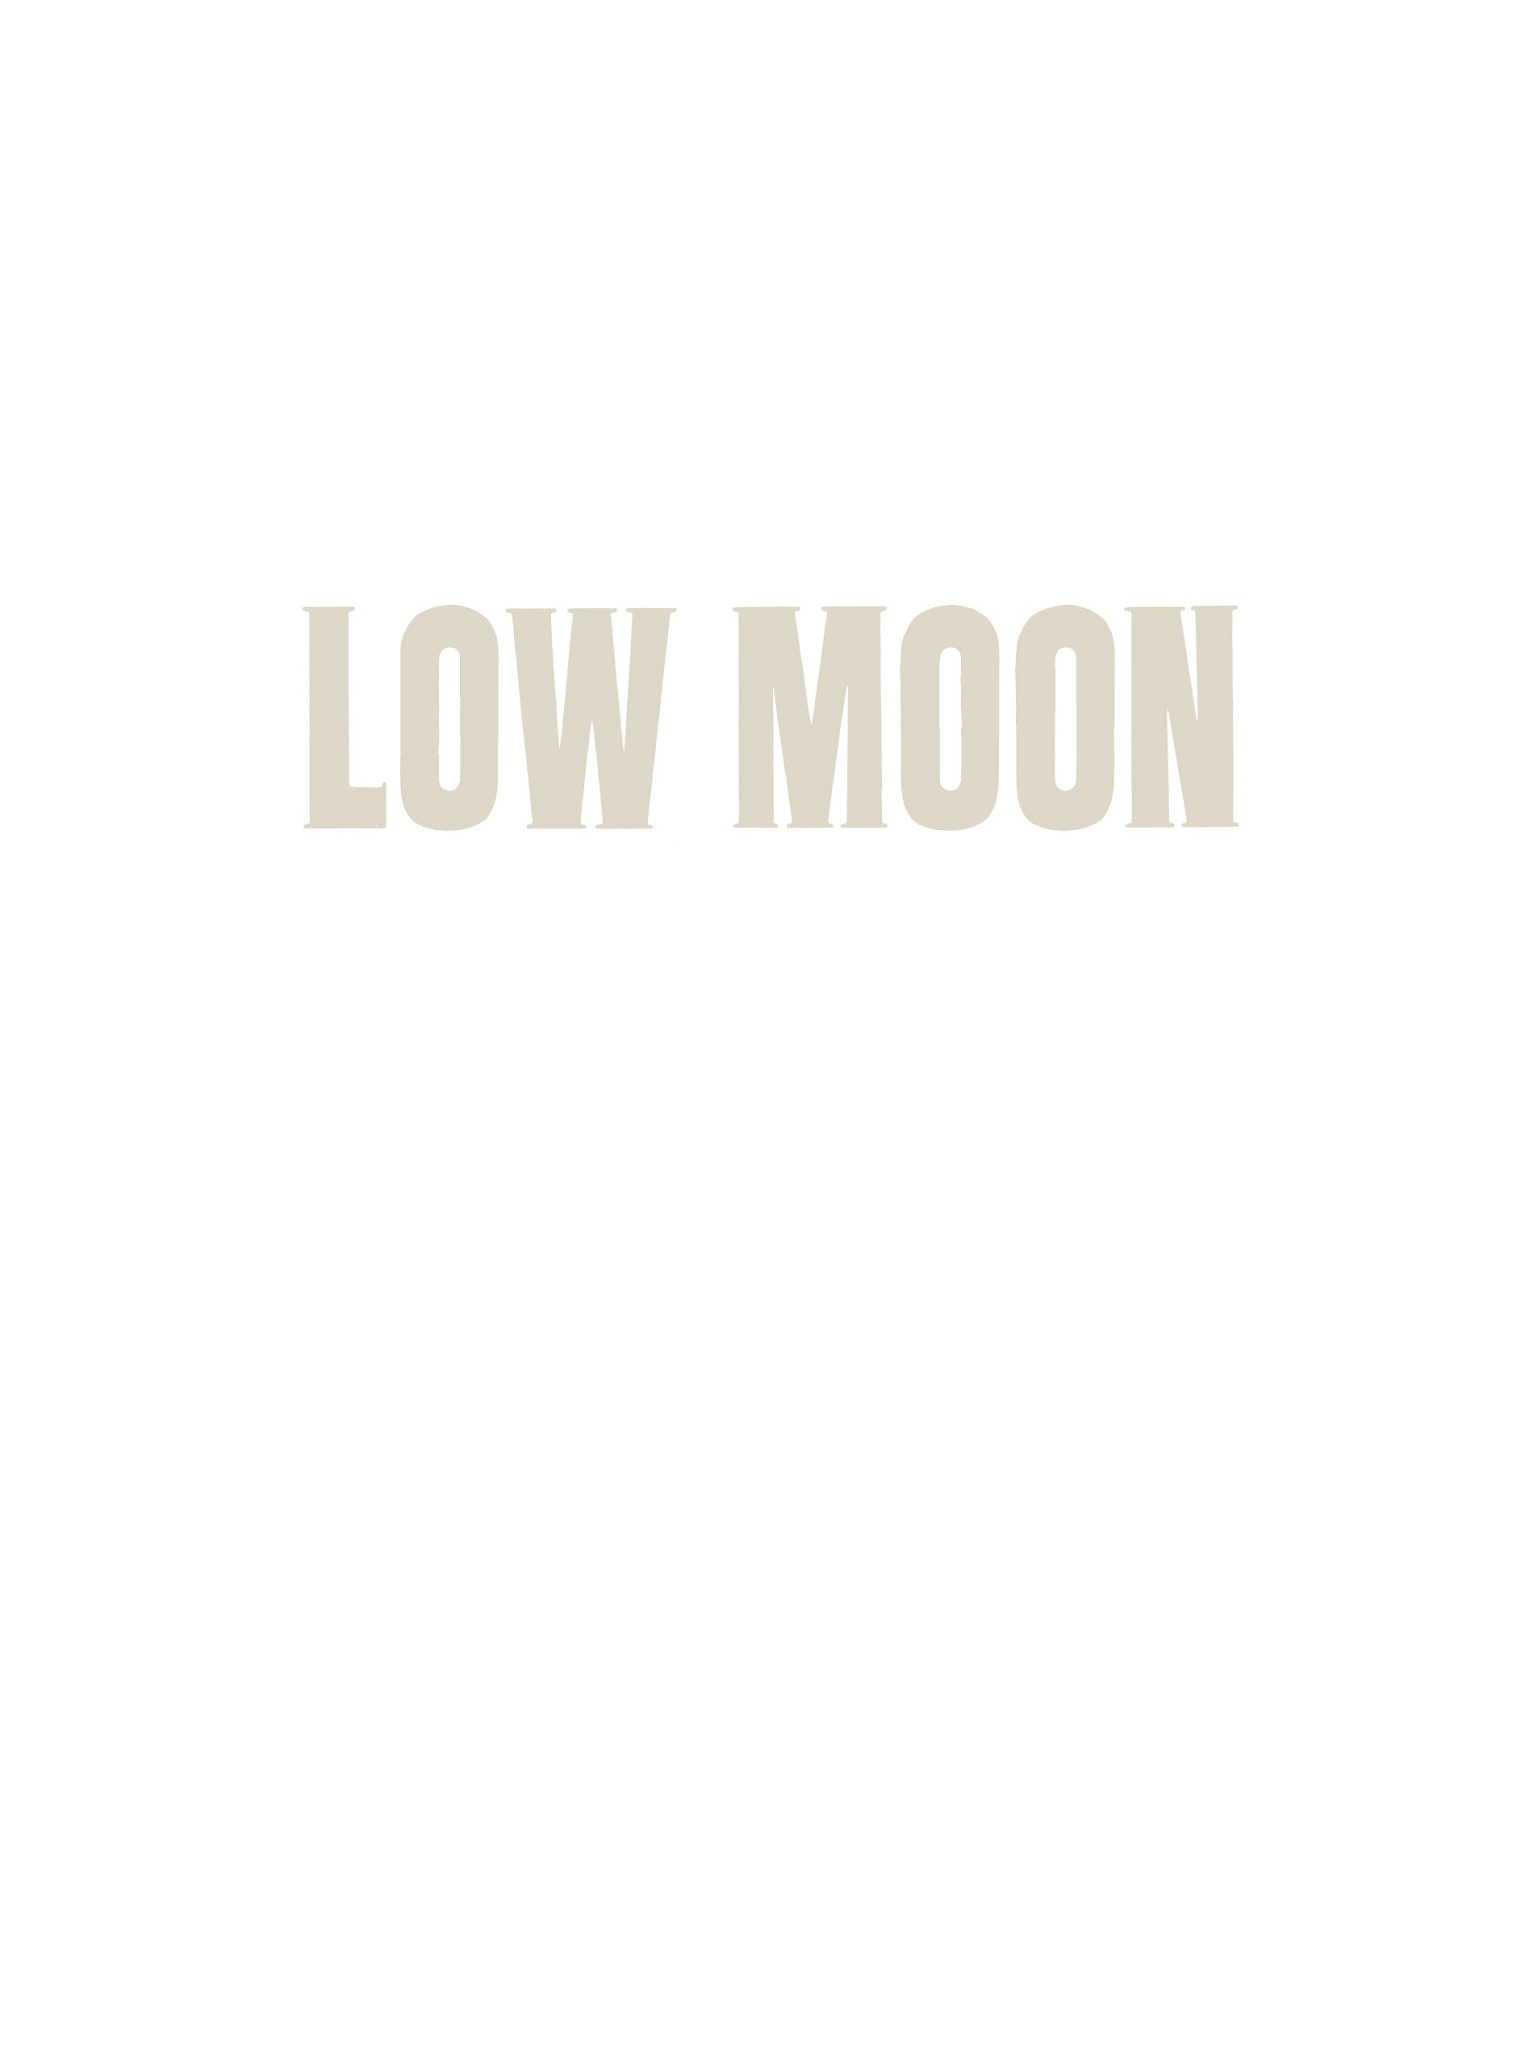 Read online Low Moon comic -  Issue # TPB - 2